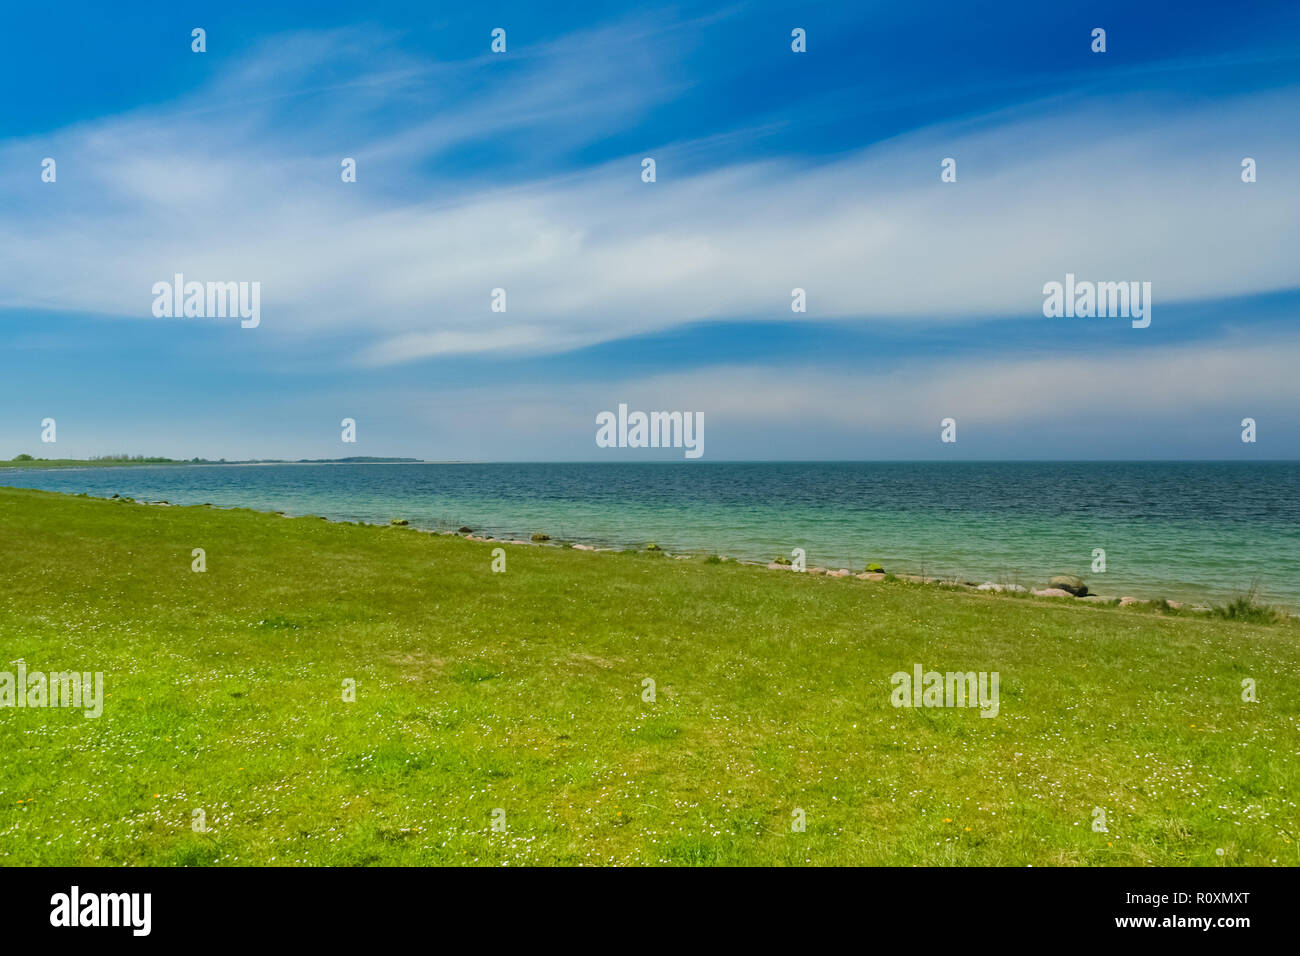 A gorgeous empty beach meadow overlooking the Baltic Sea under a blue sky on Fehmarn island in Germany. Stock Photo